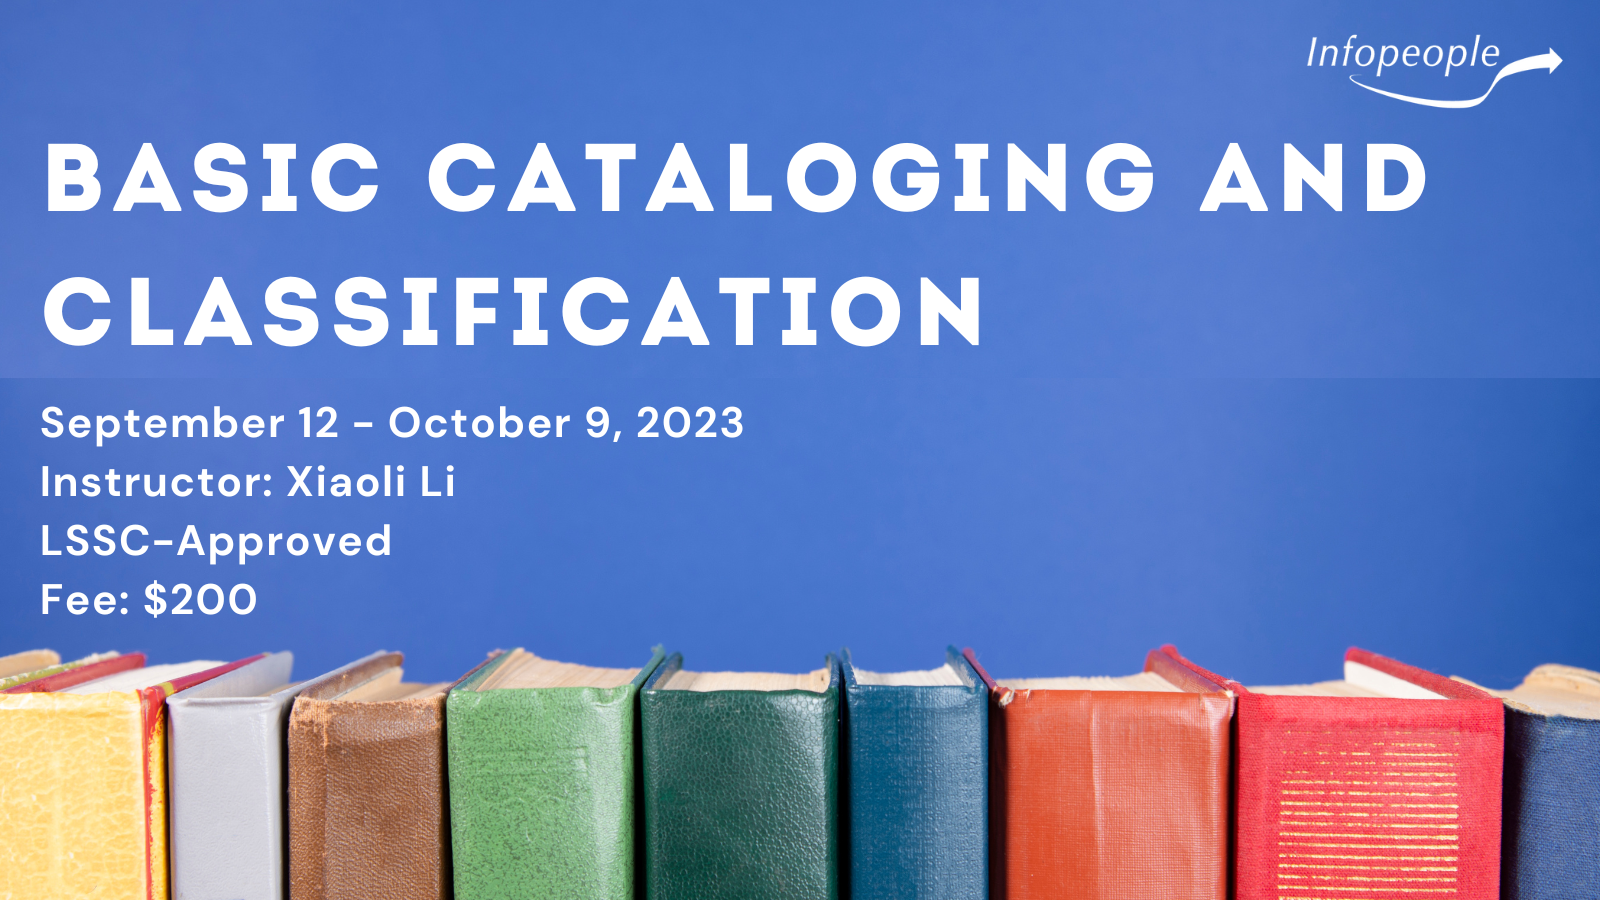 Basic Cataloging and Classification, an Infopeople course. September 12 to October 9, 2023. Instructor: Xiaoli Li. LSSC-approved. Fee: $200. There is a photograph of a row of brightly colored book spines.